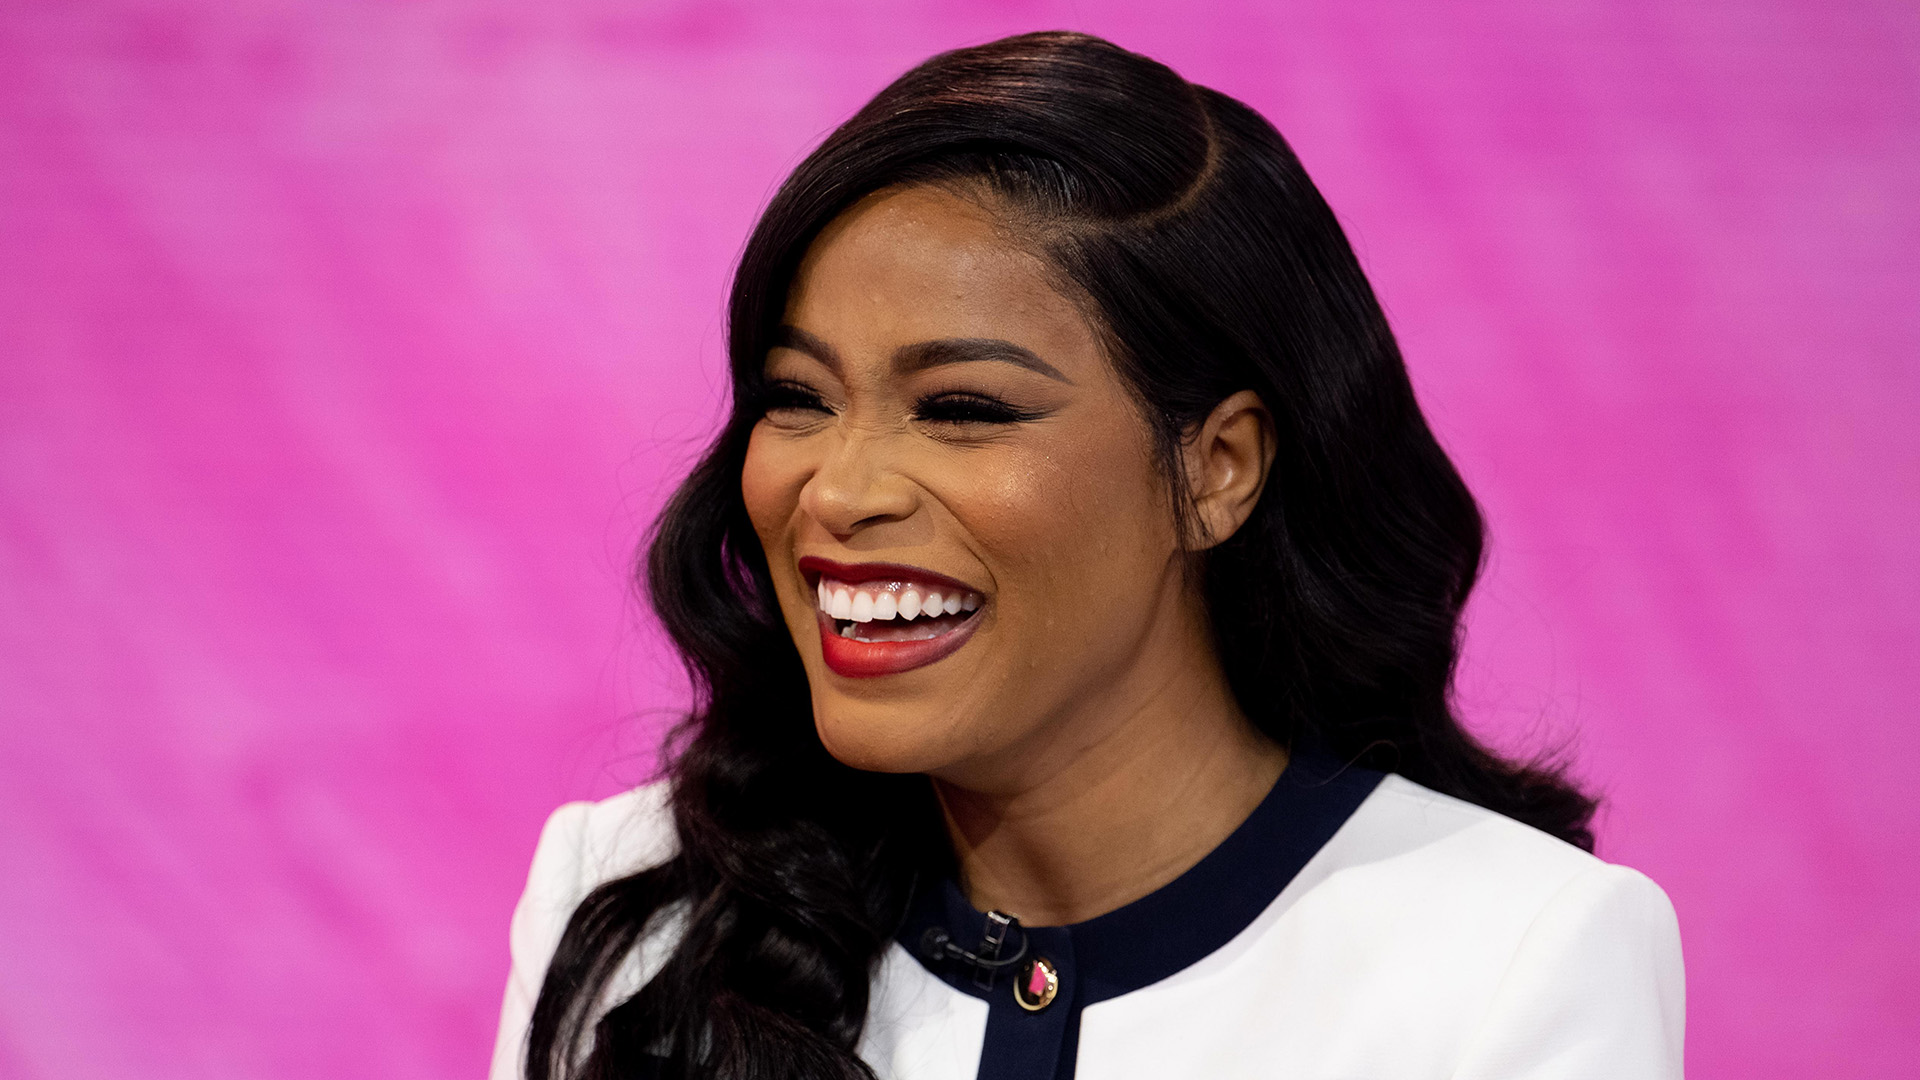 Keke Palmer says becoming a mom 'empowered me so much'